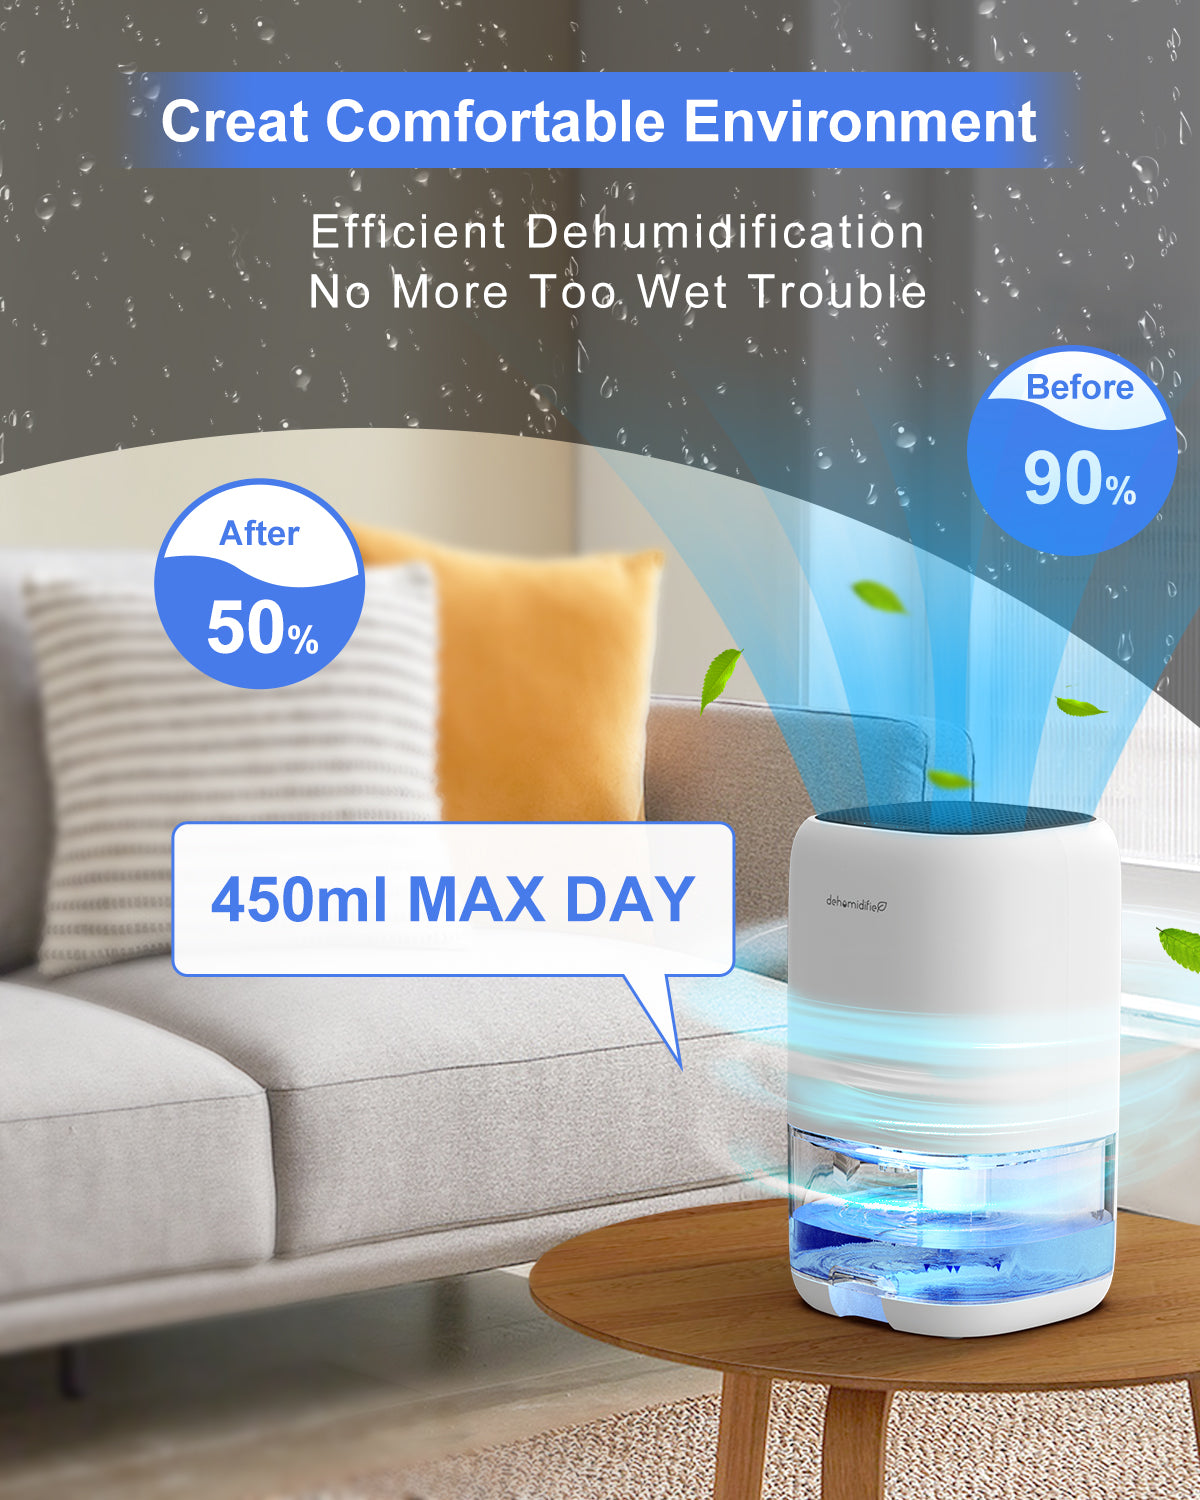 KLOUDIC Dehumidifier Portable and Ultra Quiet with Automatic Defrosting for Home 1000ML(2200 Cubic Feet)